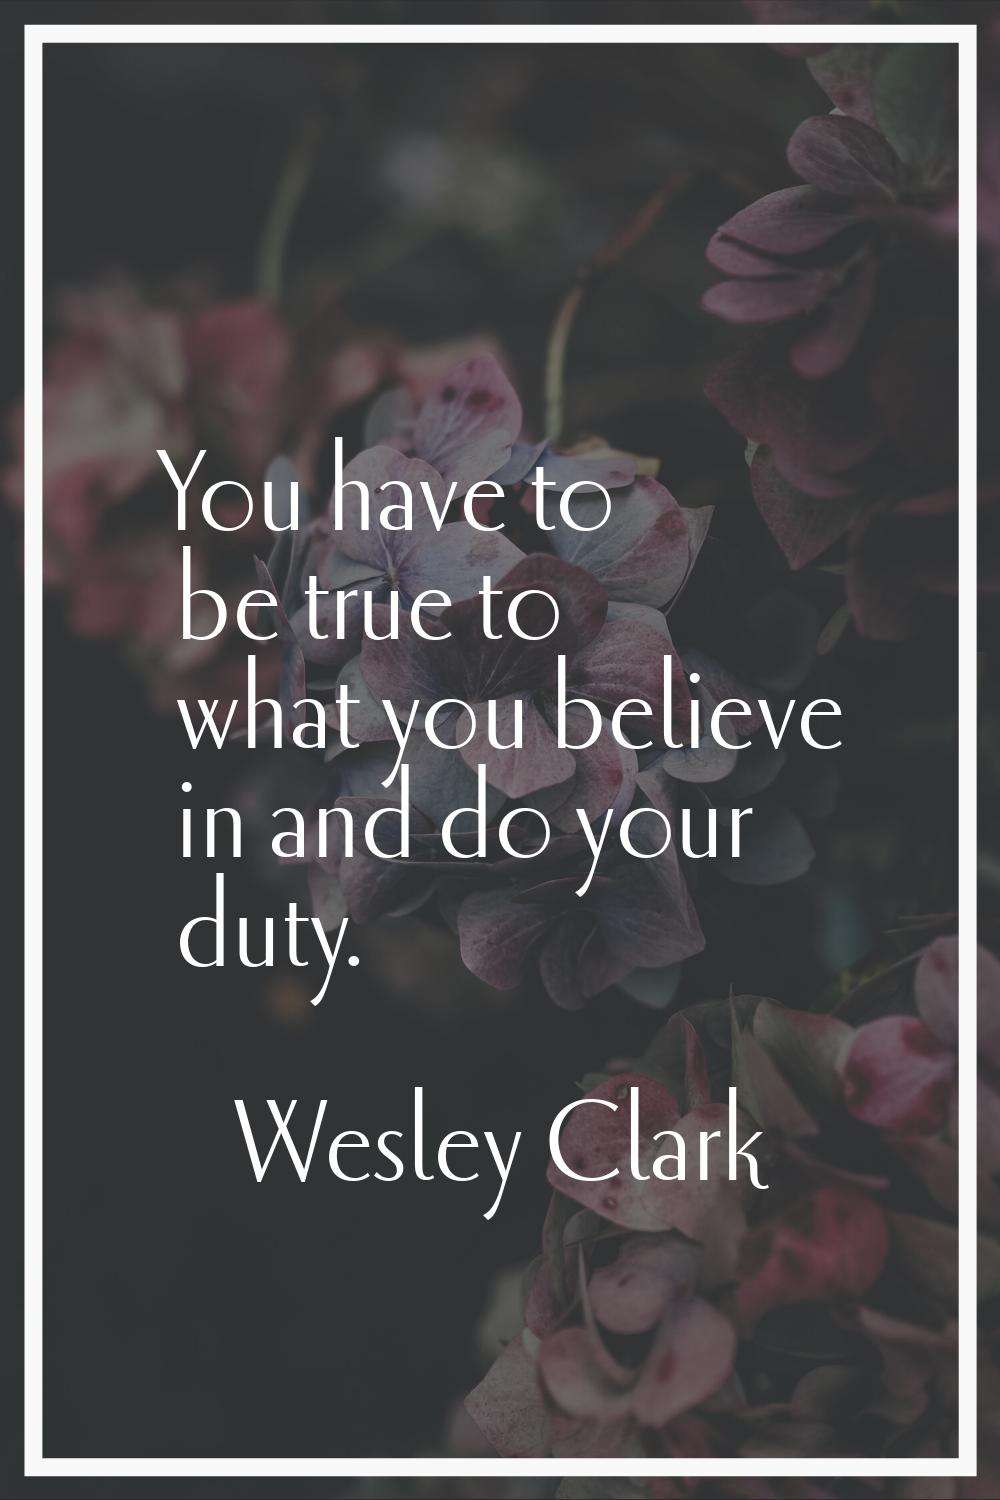 You have to be true to what you believe in and do your duty.